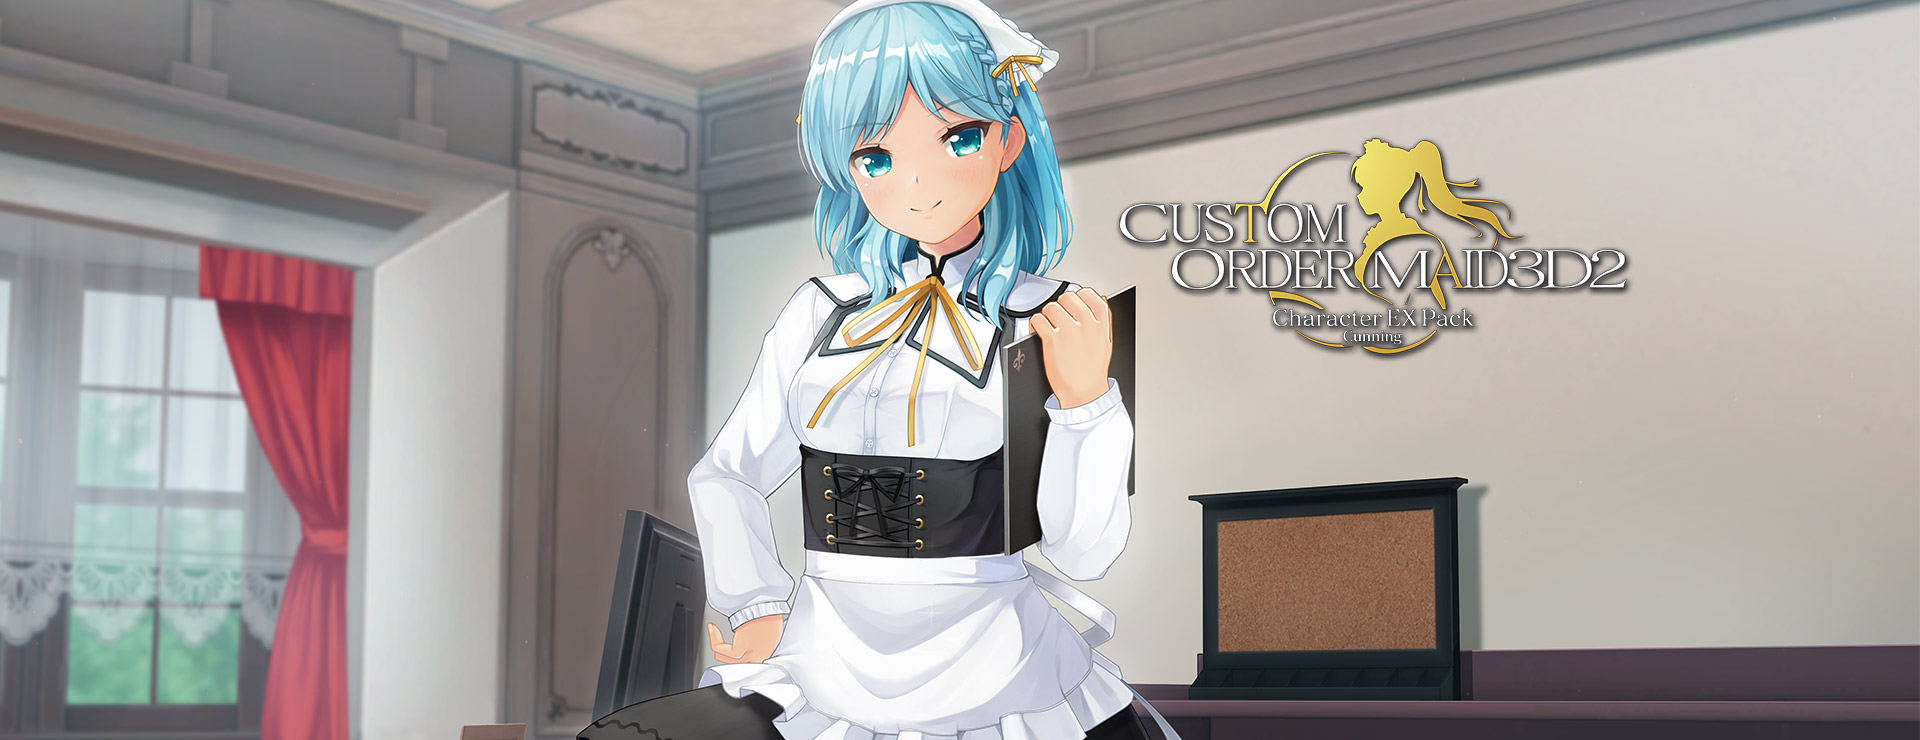 Custom Order Maid 3D: Character EX Pack Cunning - Symulacja Gra